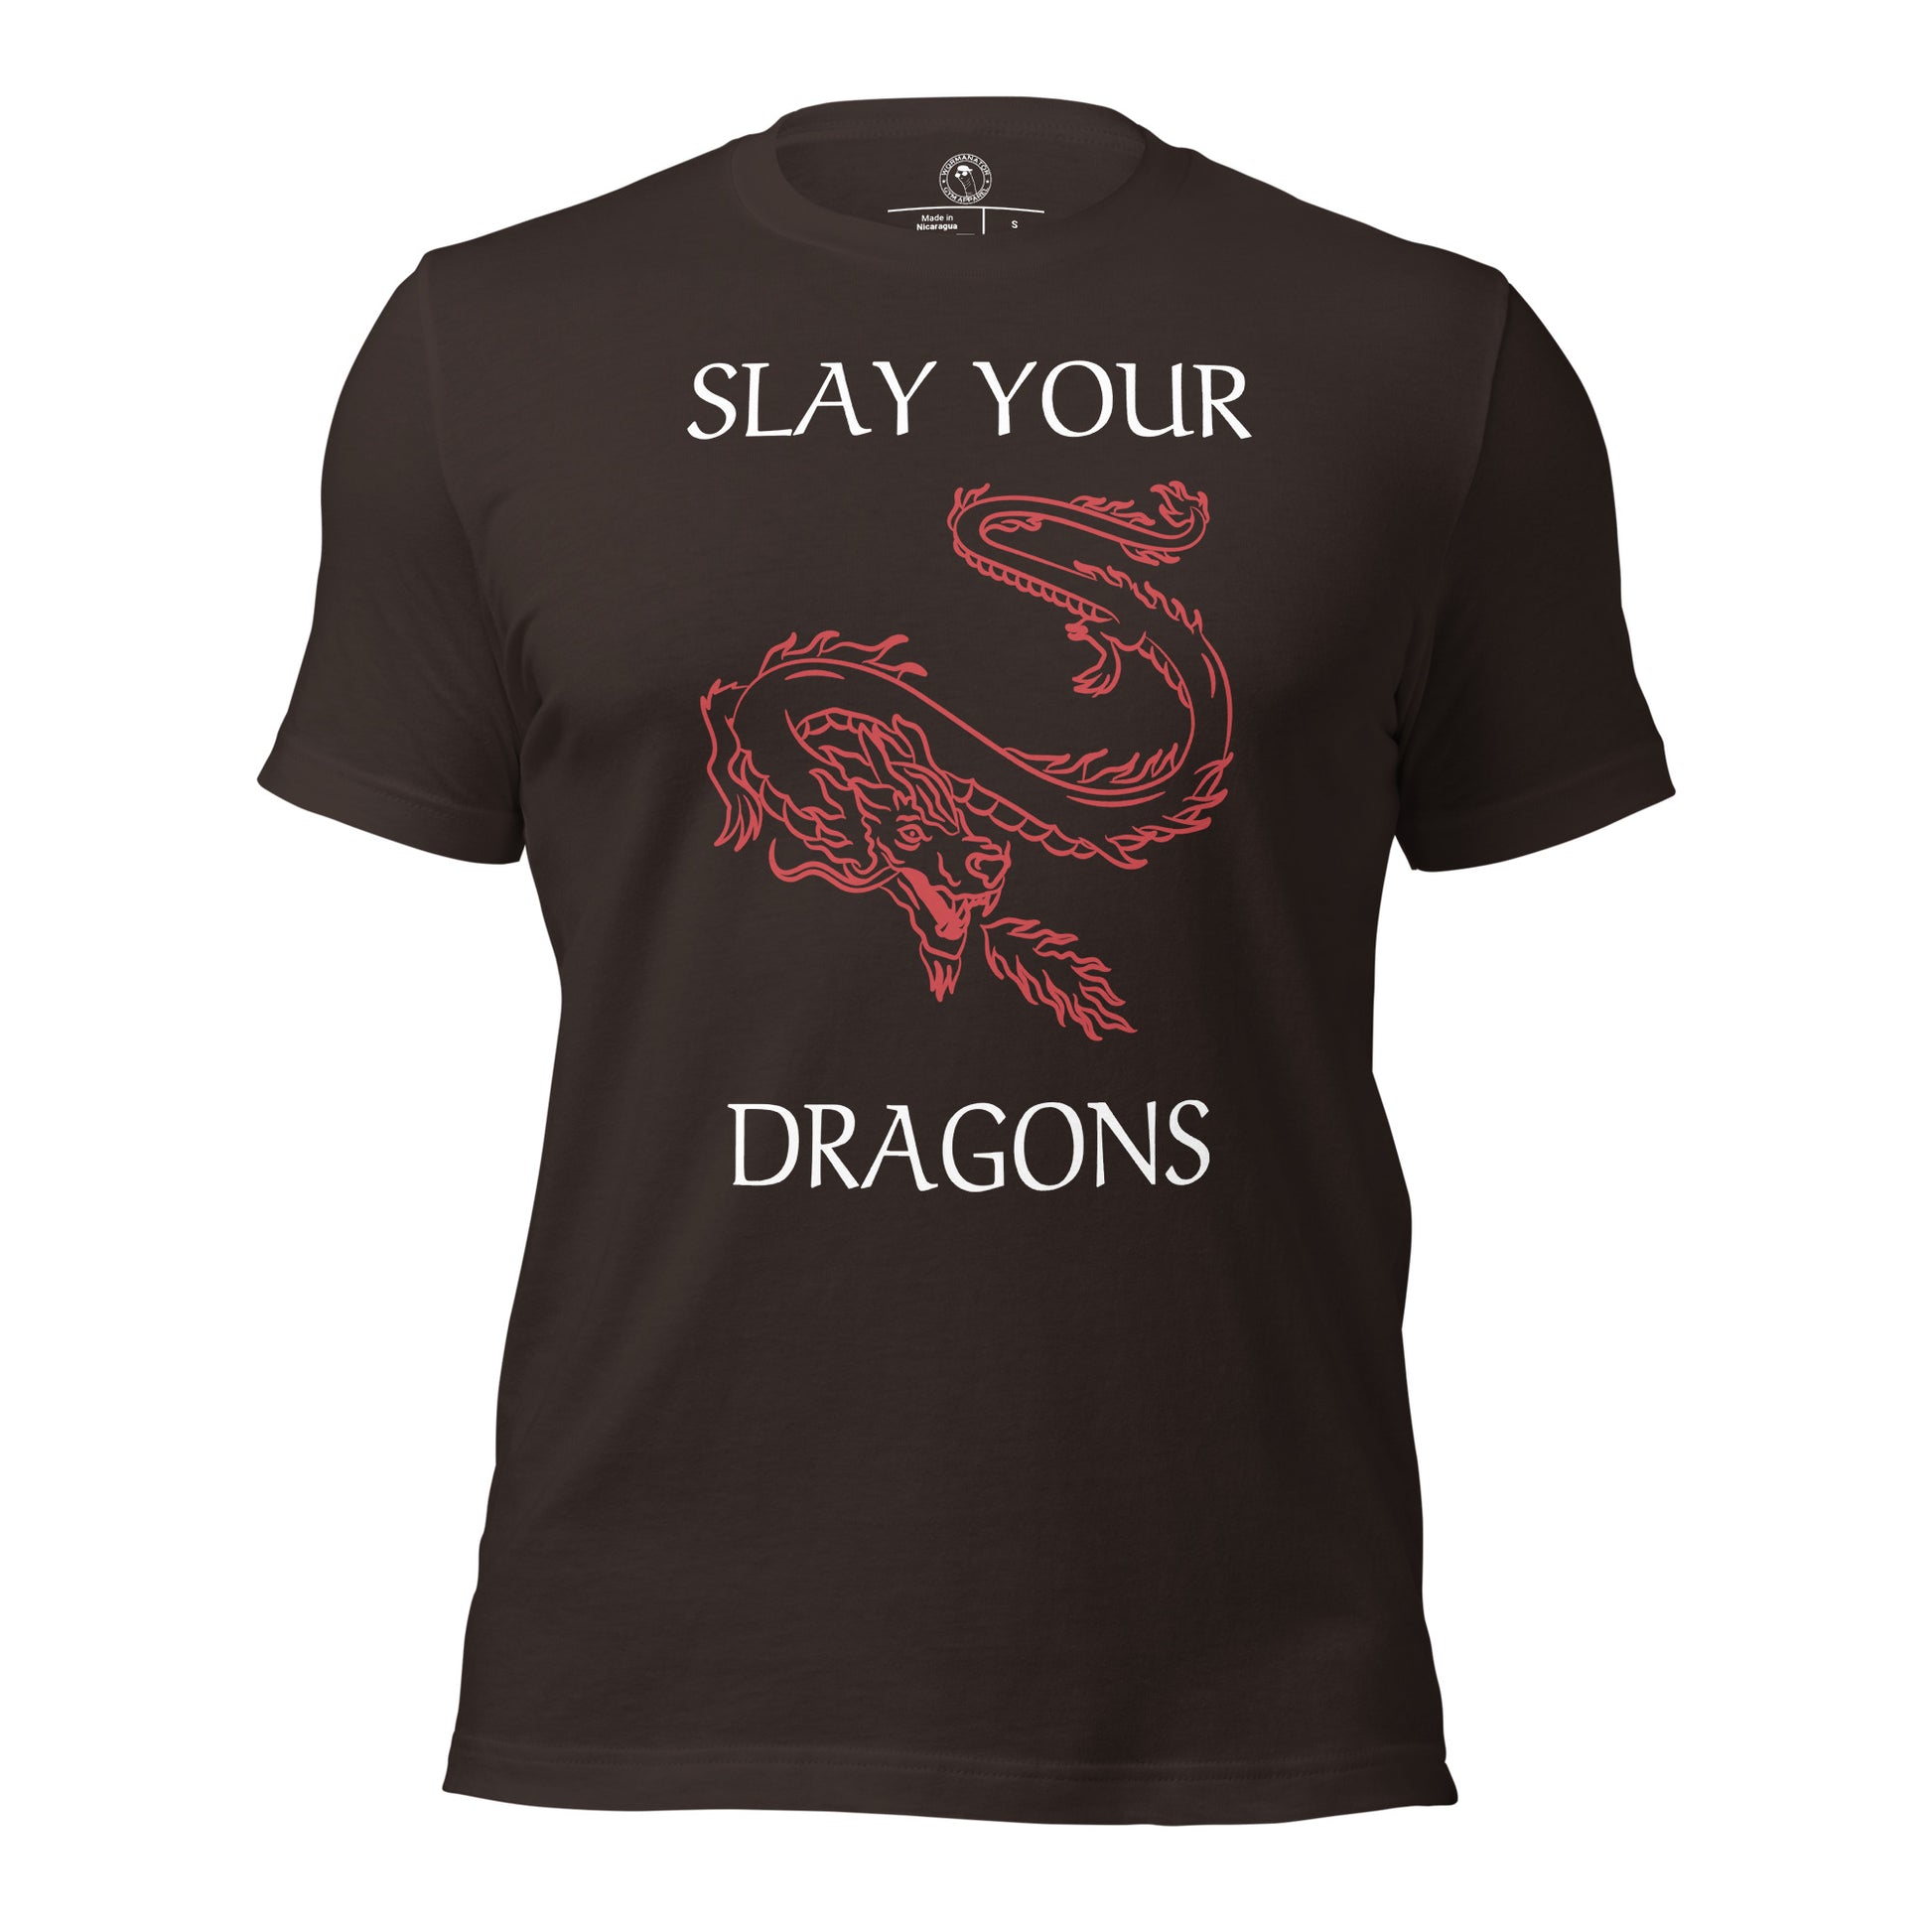 Slay Your Dragons Shirt in Brown